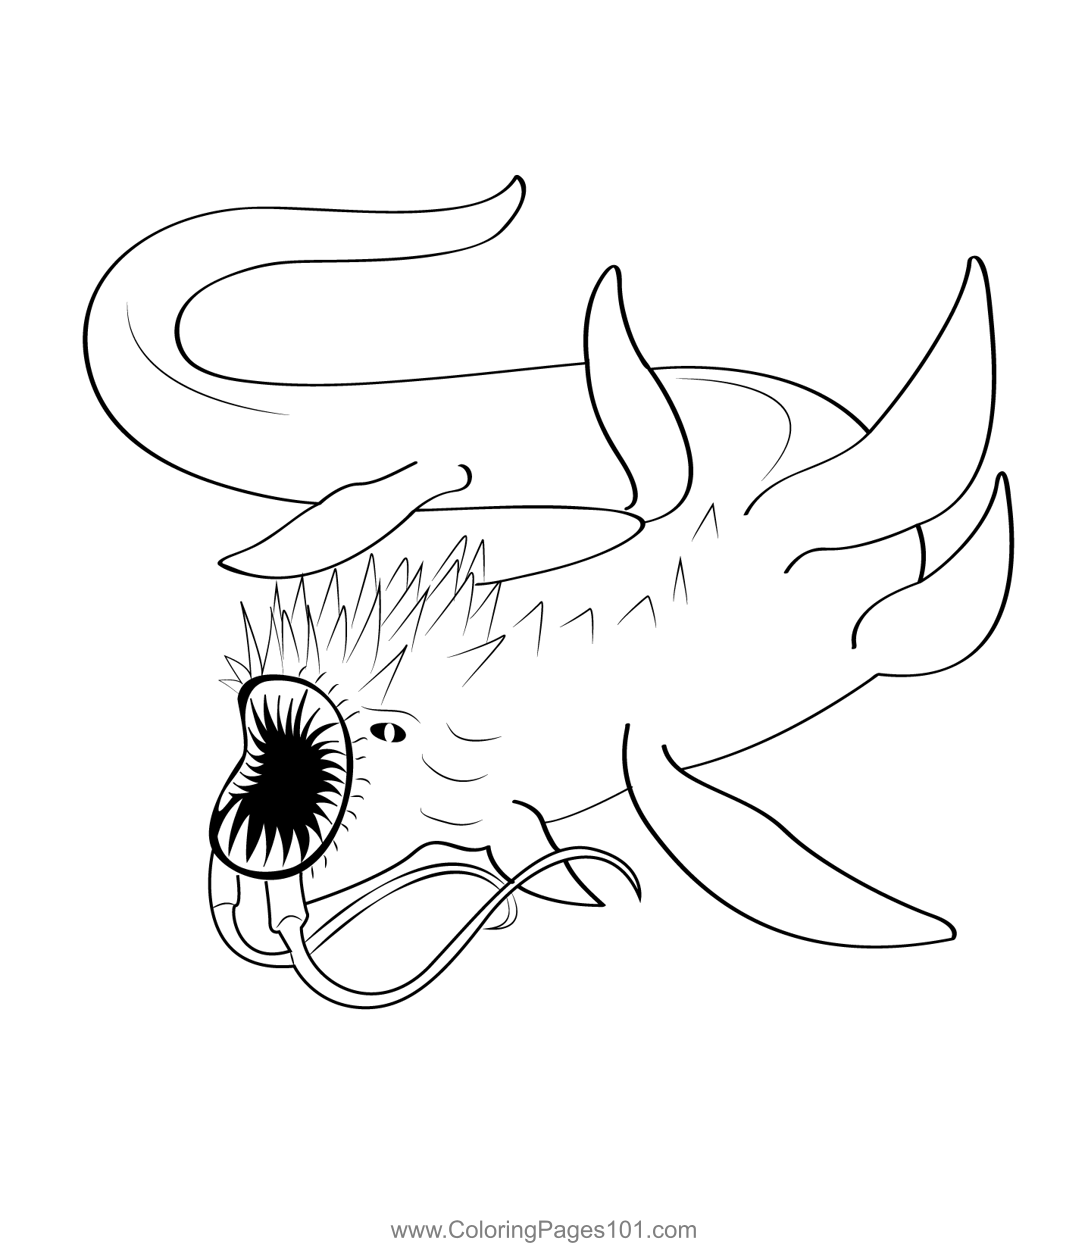 Sea Monster 4 Coloring Page for Kids - Free Sea Monsters Printable ...